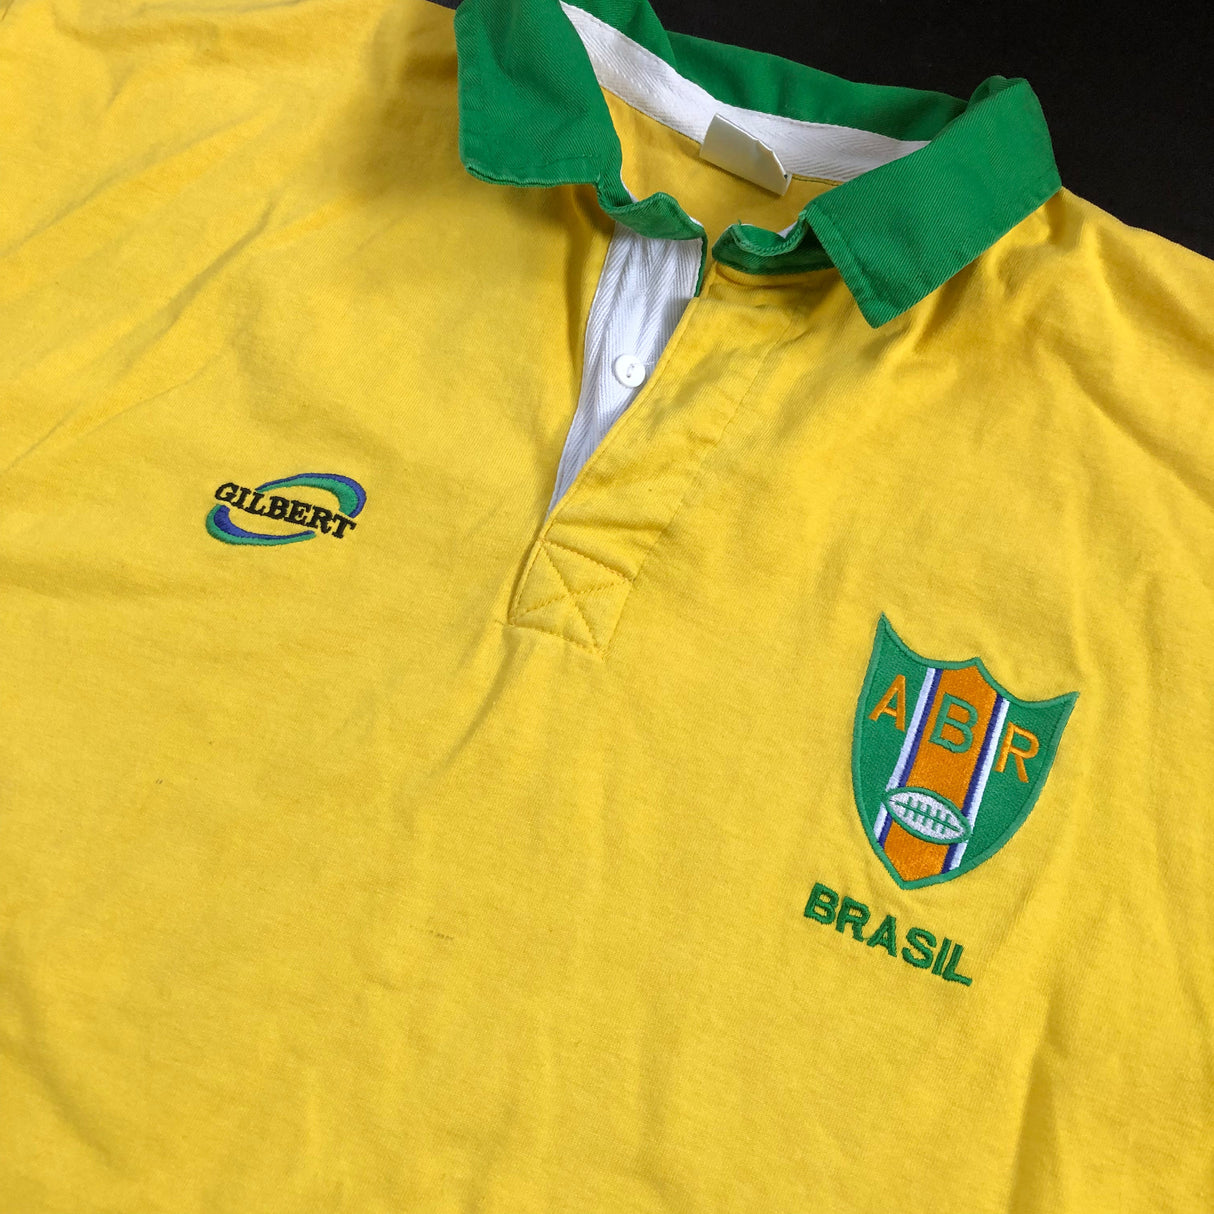 Brazil National Rugby Team Jersey 1993 Large Underdog Rugby - The Tier 2 Rugby Shop 